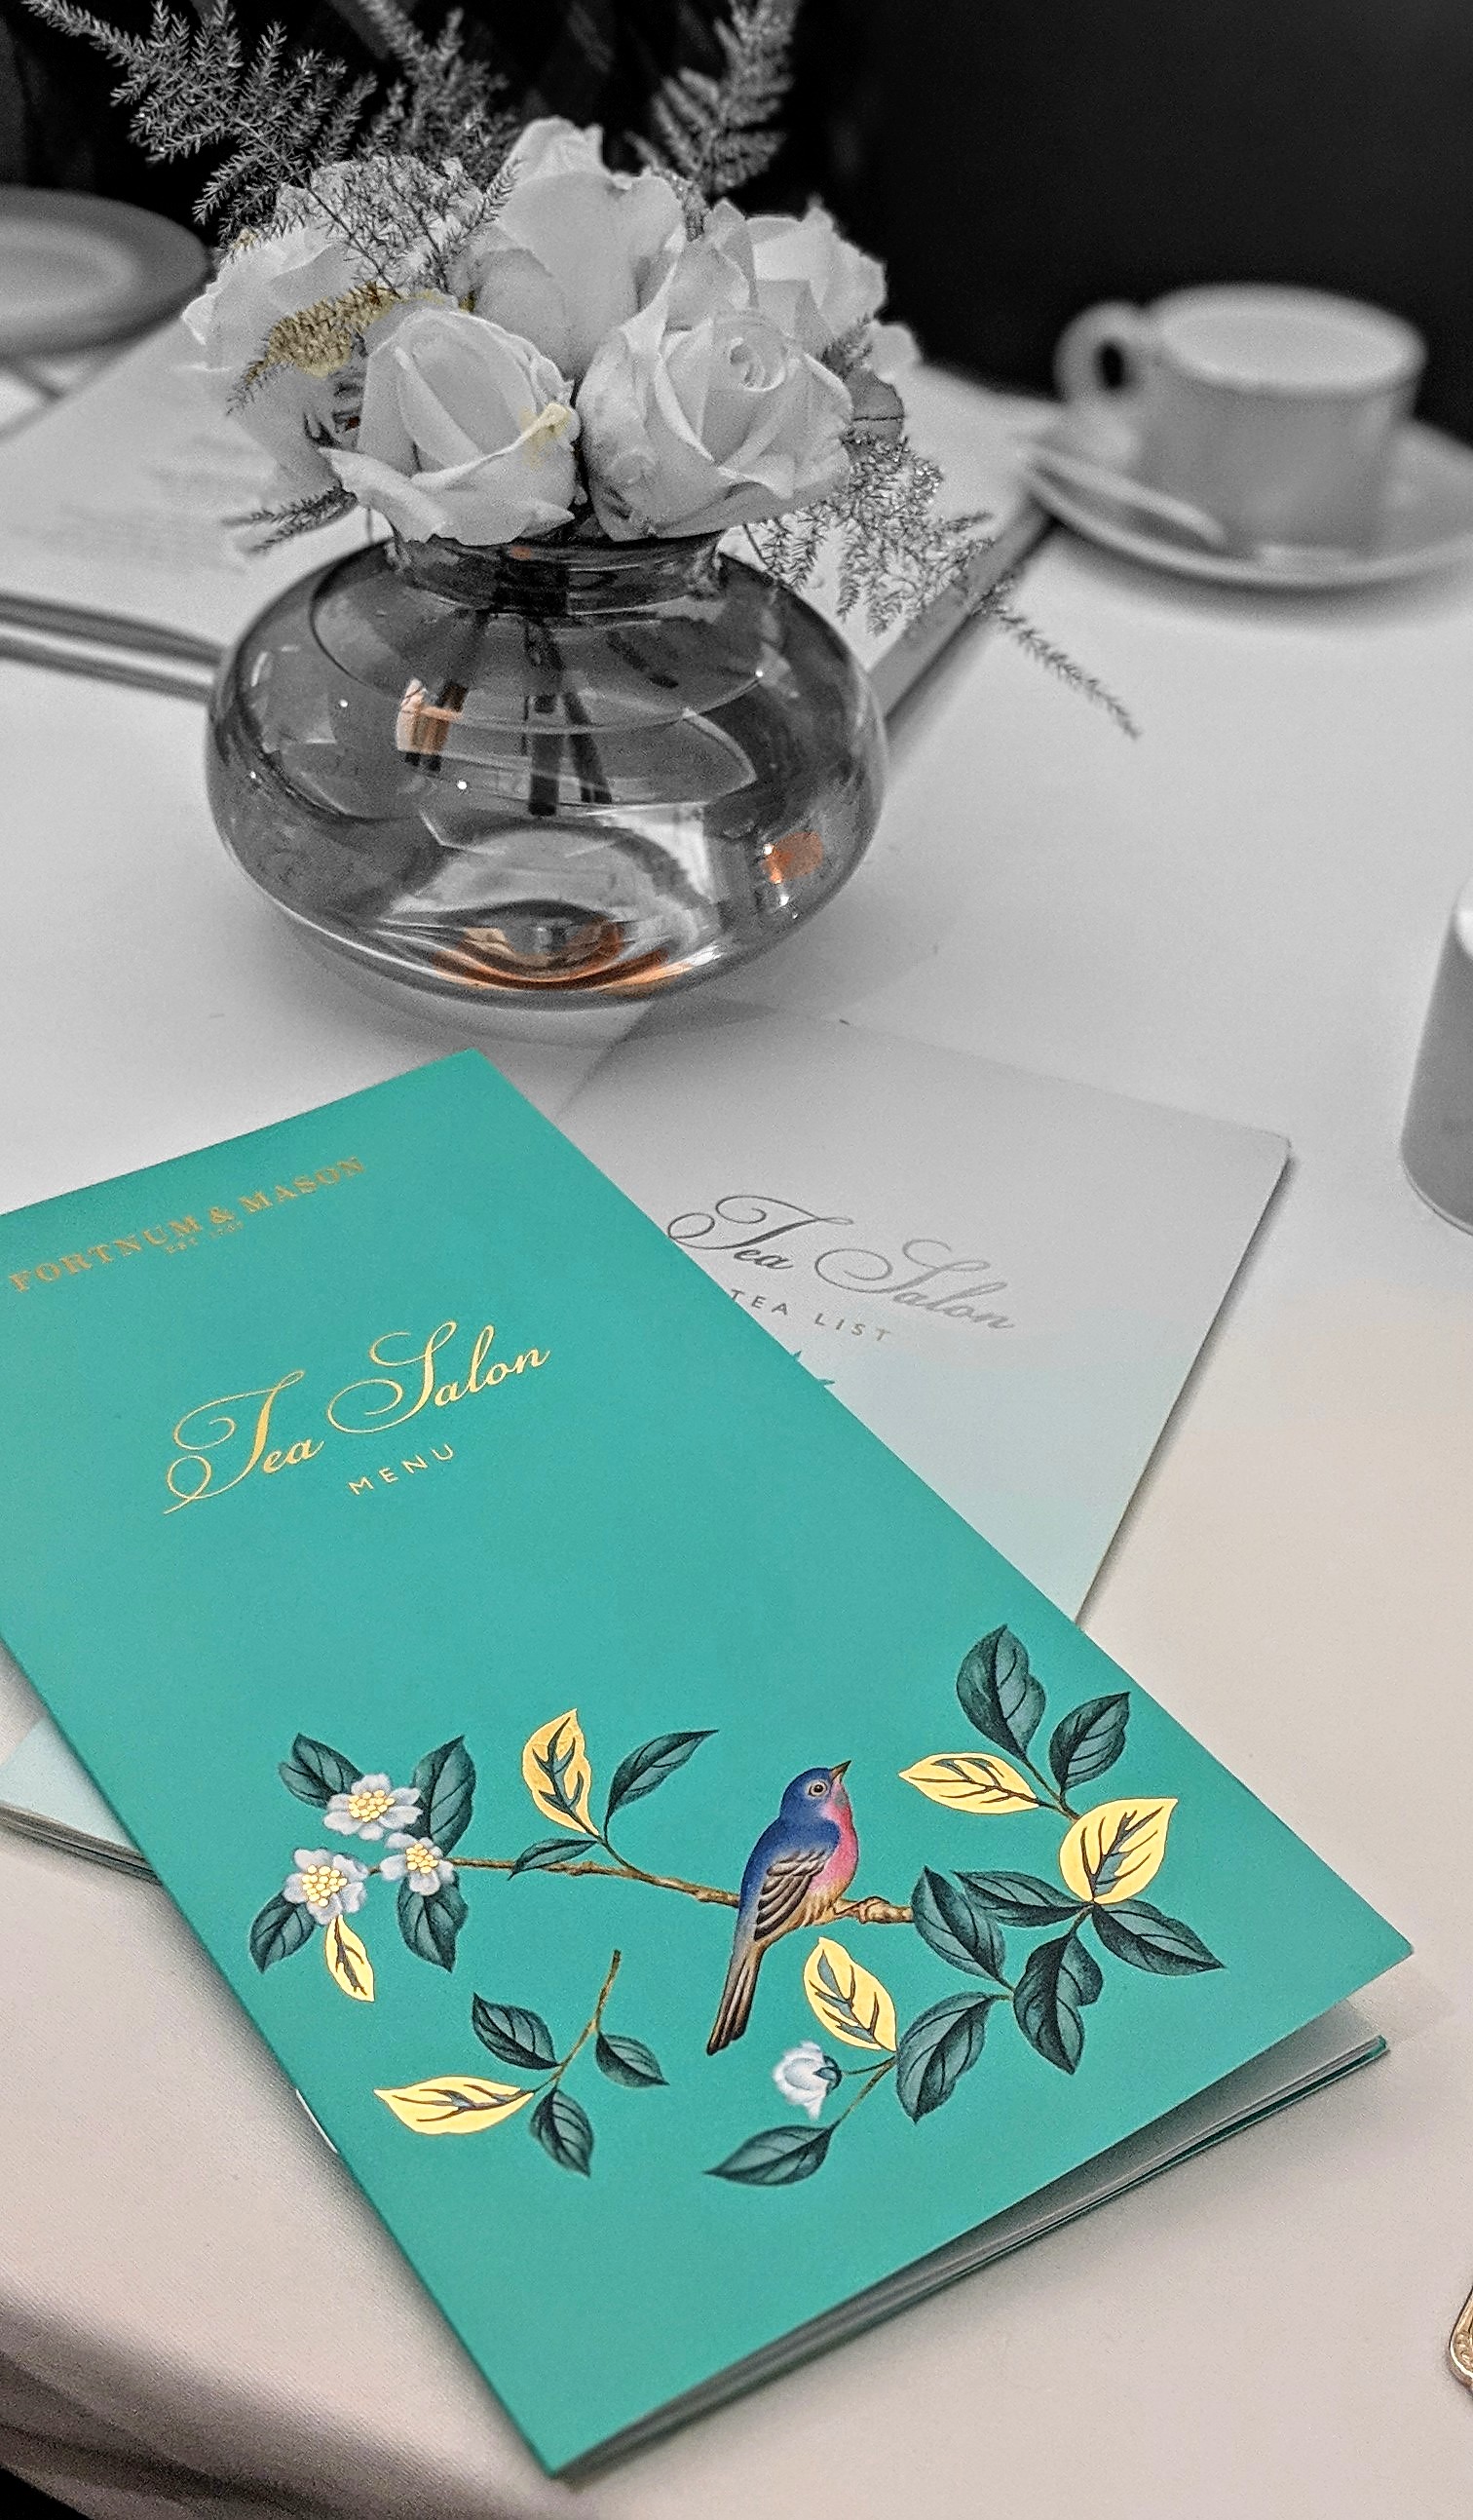 Traditional Afternoon Tea Experience At Fortnum & Mason, London